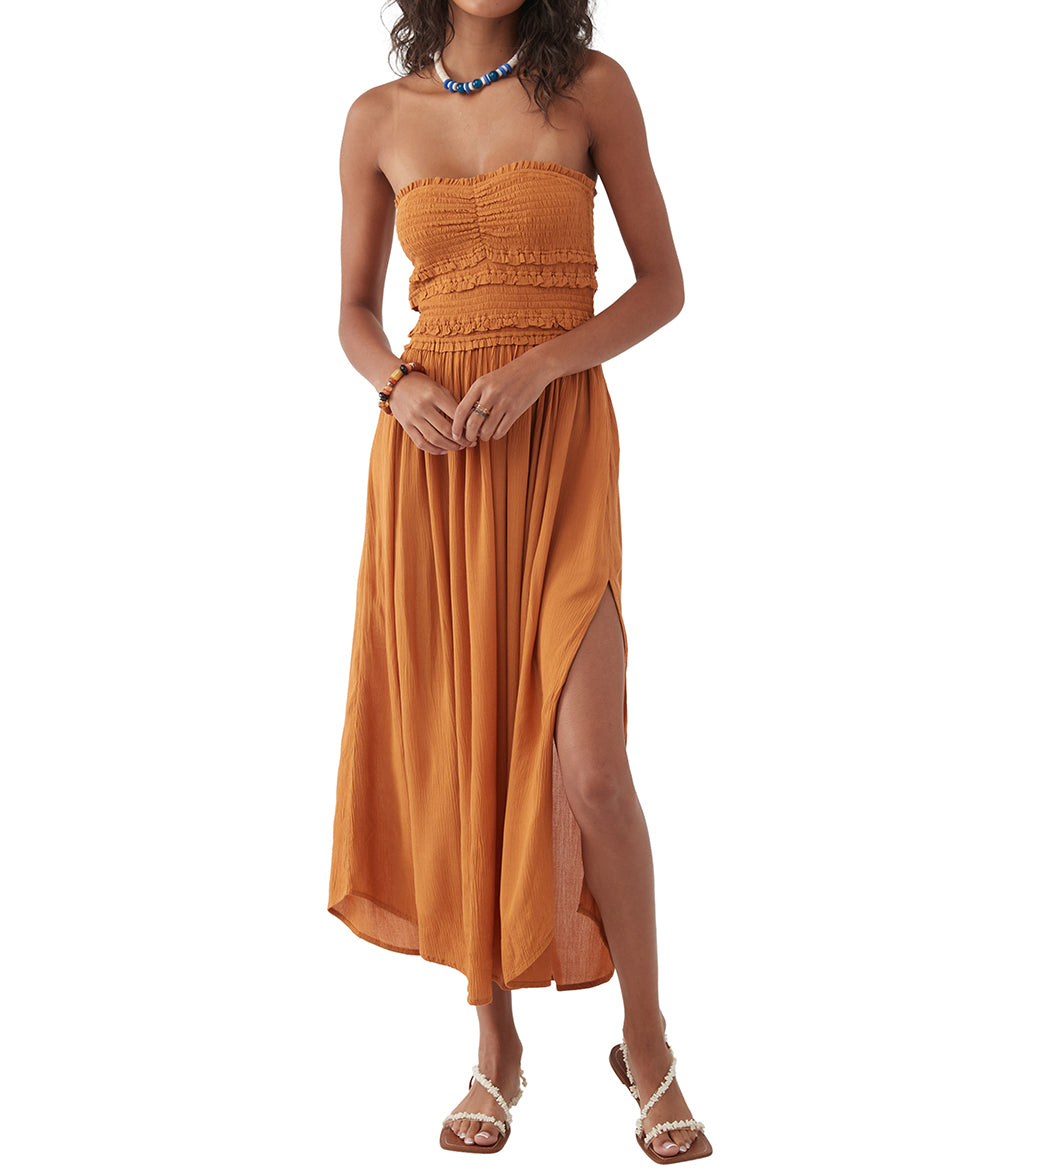 Rip Curl Women's Sun Dance Cover Up Dress at